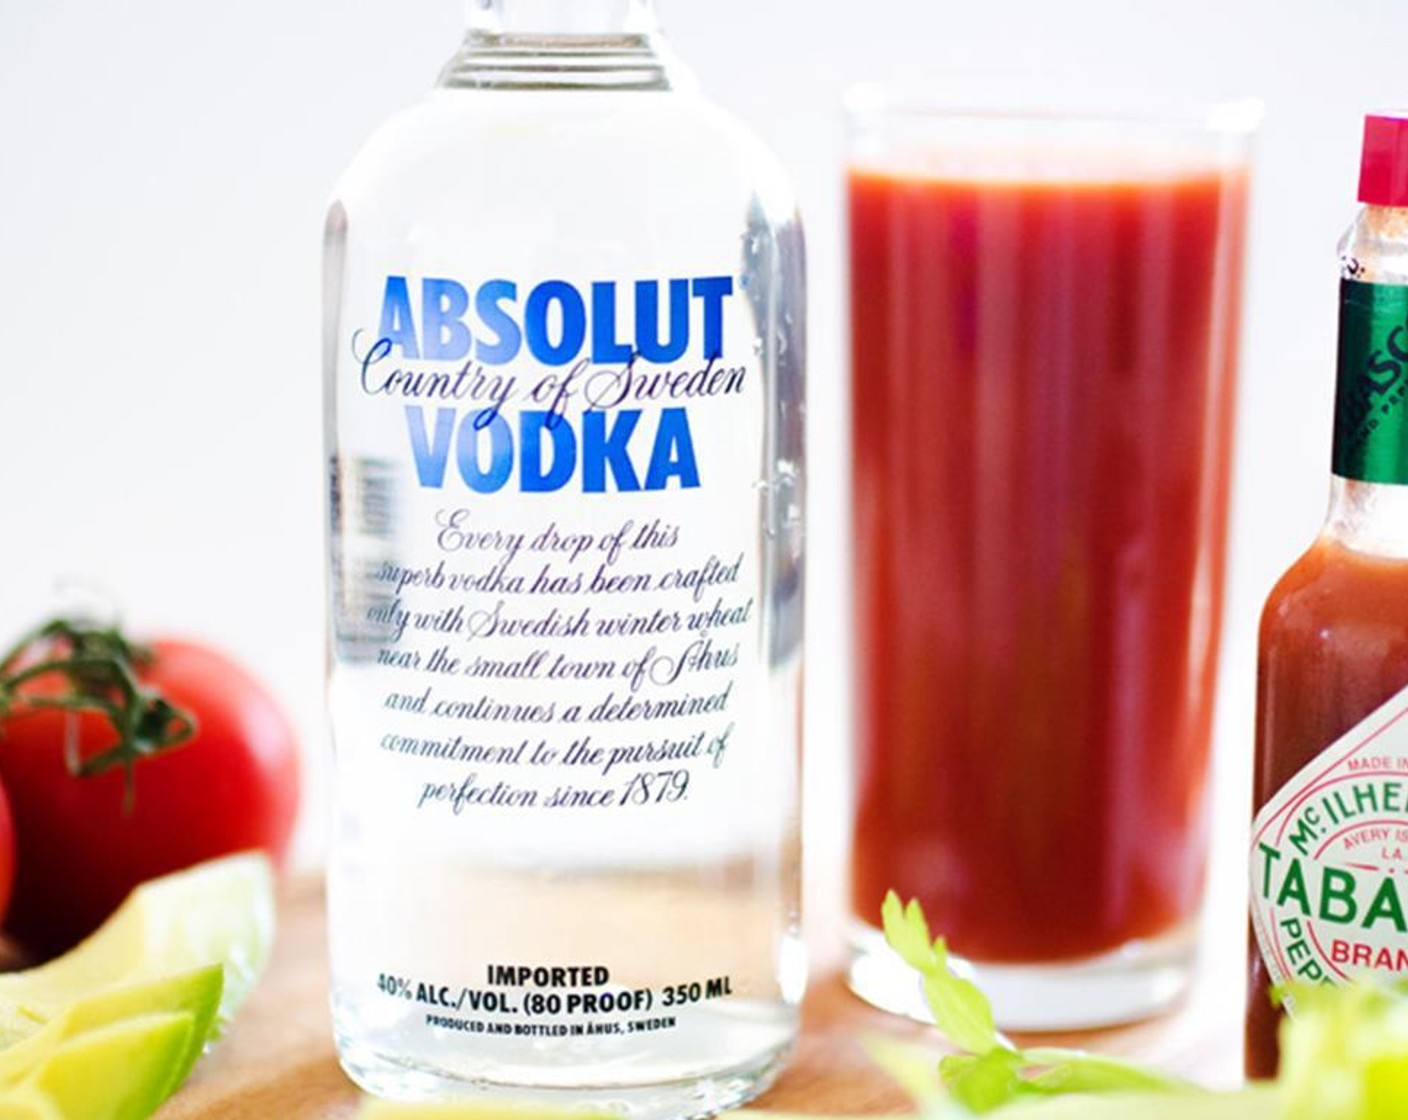 step 1 Add Absolut® Vodka (1/4 cup), Tomato Juice (1/2 cup), Tabasco® Original Red Pepper Sauce (1/2 tsp), Worcestershire Sauce (1/2 tsp), Salt (1 pinch), Ground Black Pepper (1 pinch), Paprika (1 pinch), Lemon (1/4), and Ice (to taste) into a shaker. Shake well.